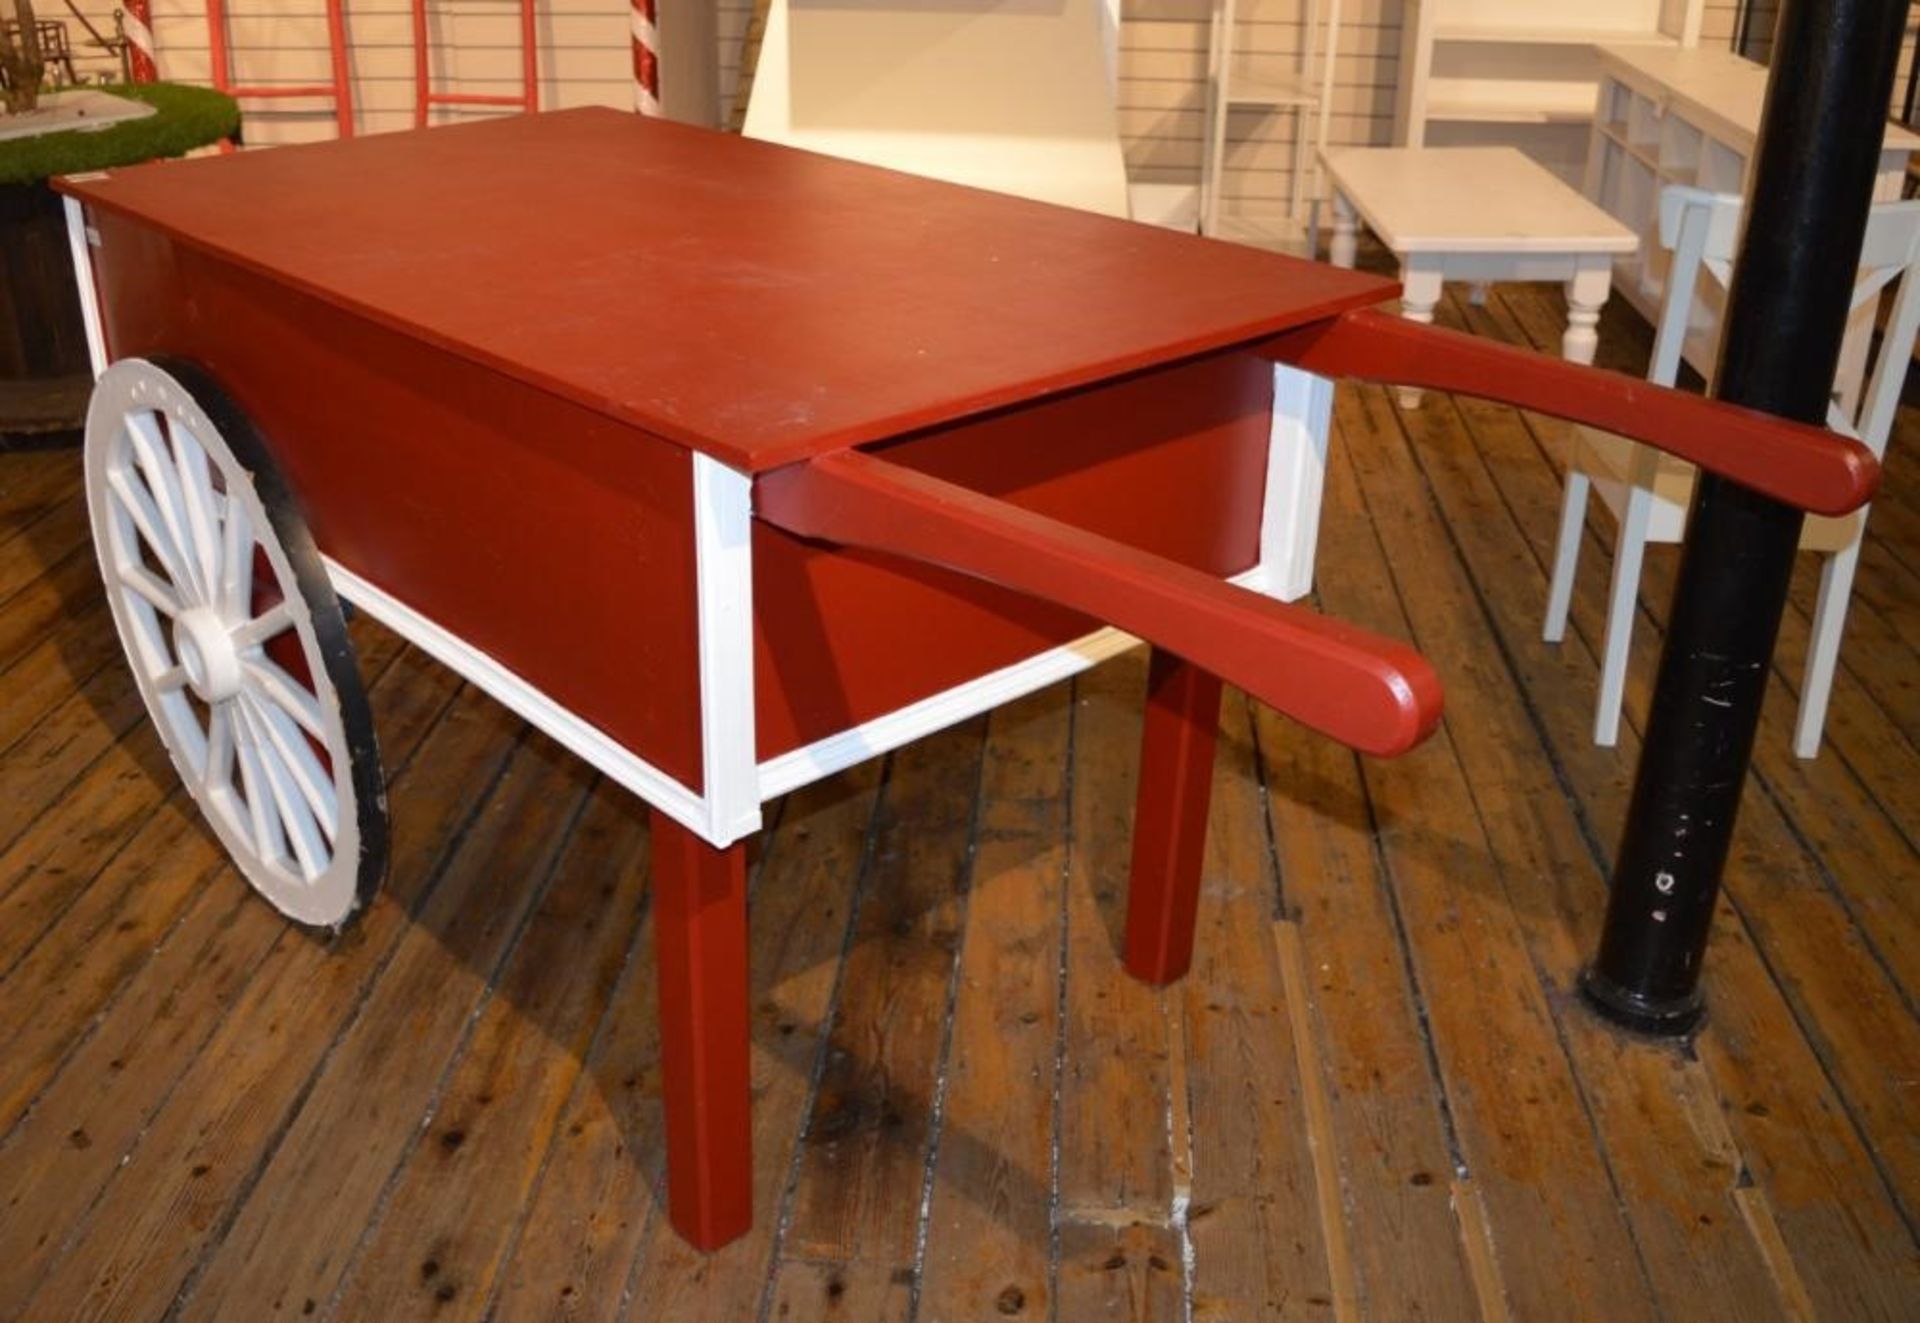 1 x Retail Display Cart in Red - H94 x W95 x D150 (204 with handles) cms - Ref BB376 TF - CL351 - Lo - Image 3 of 5